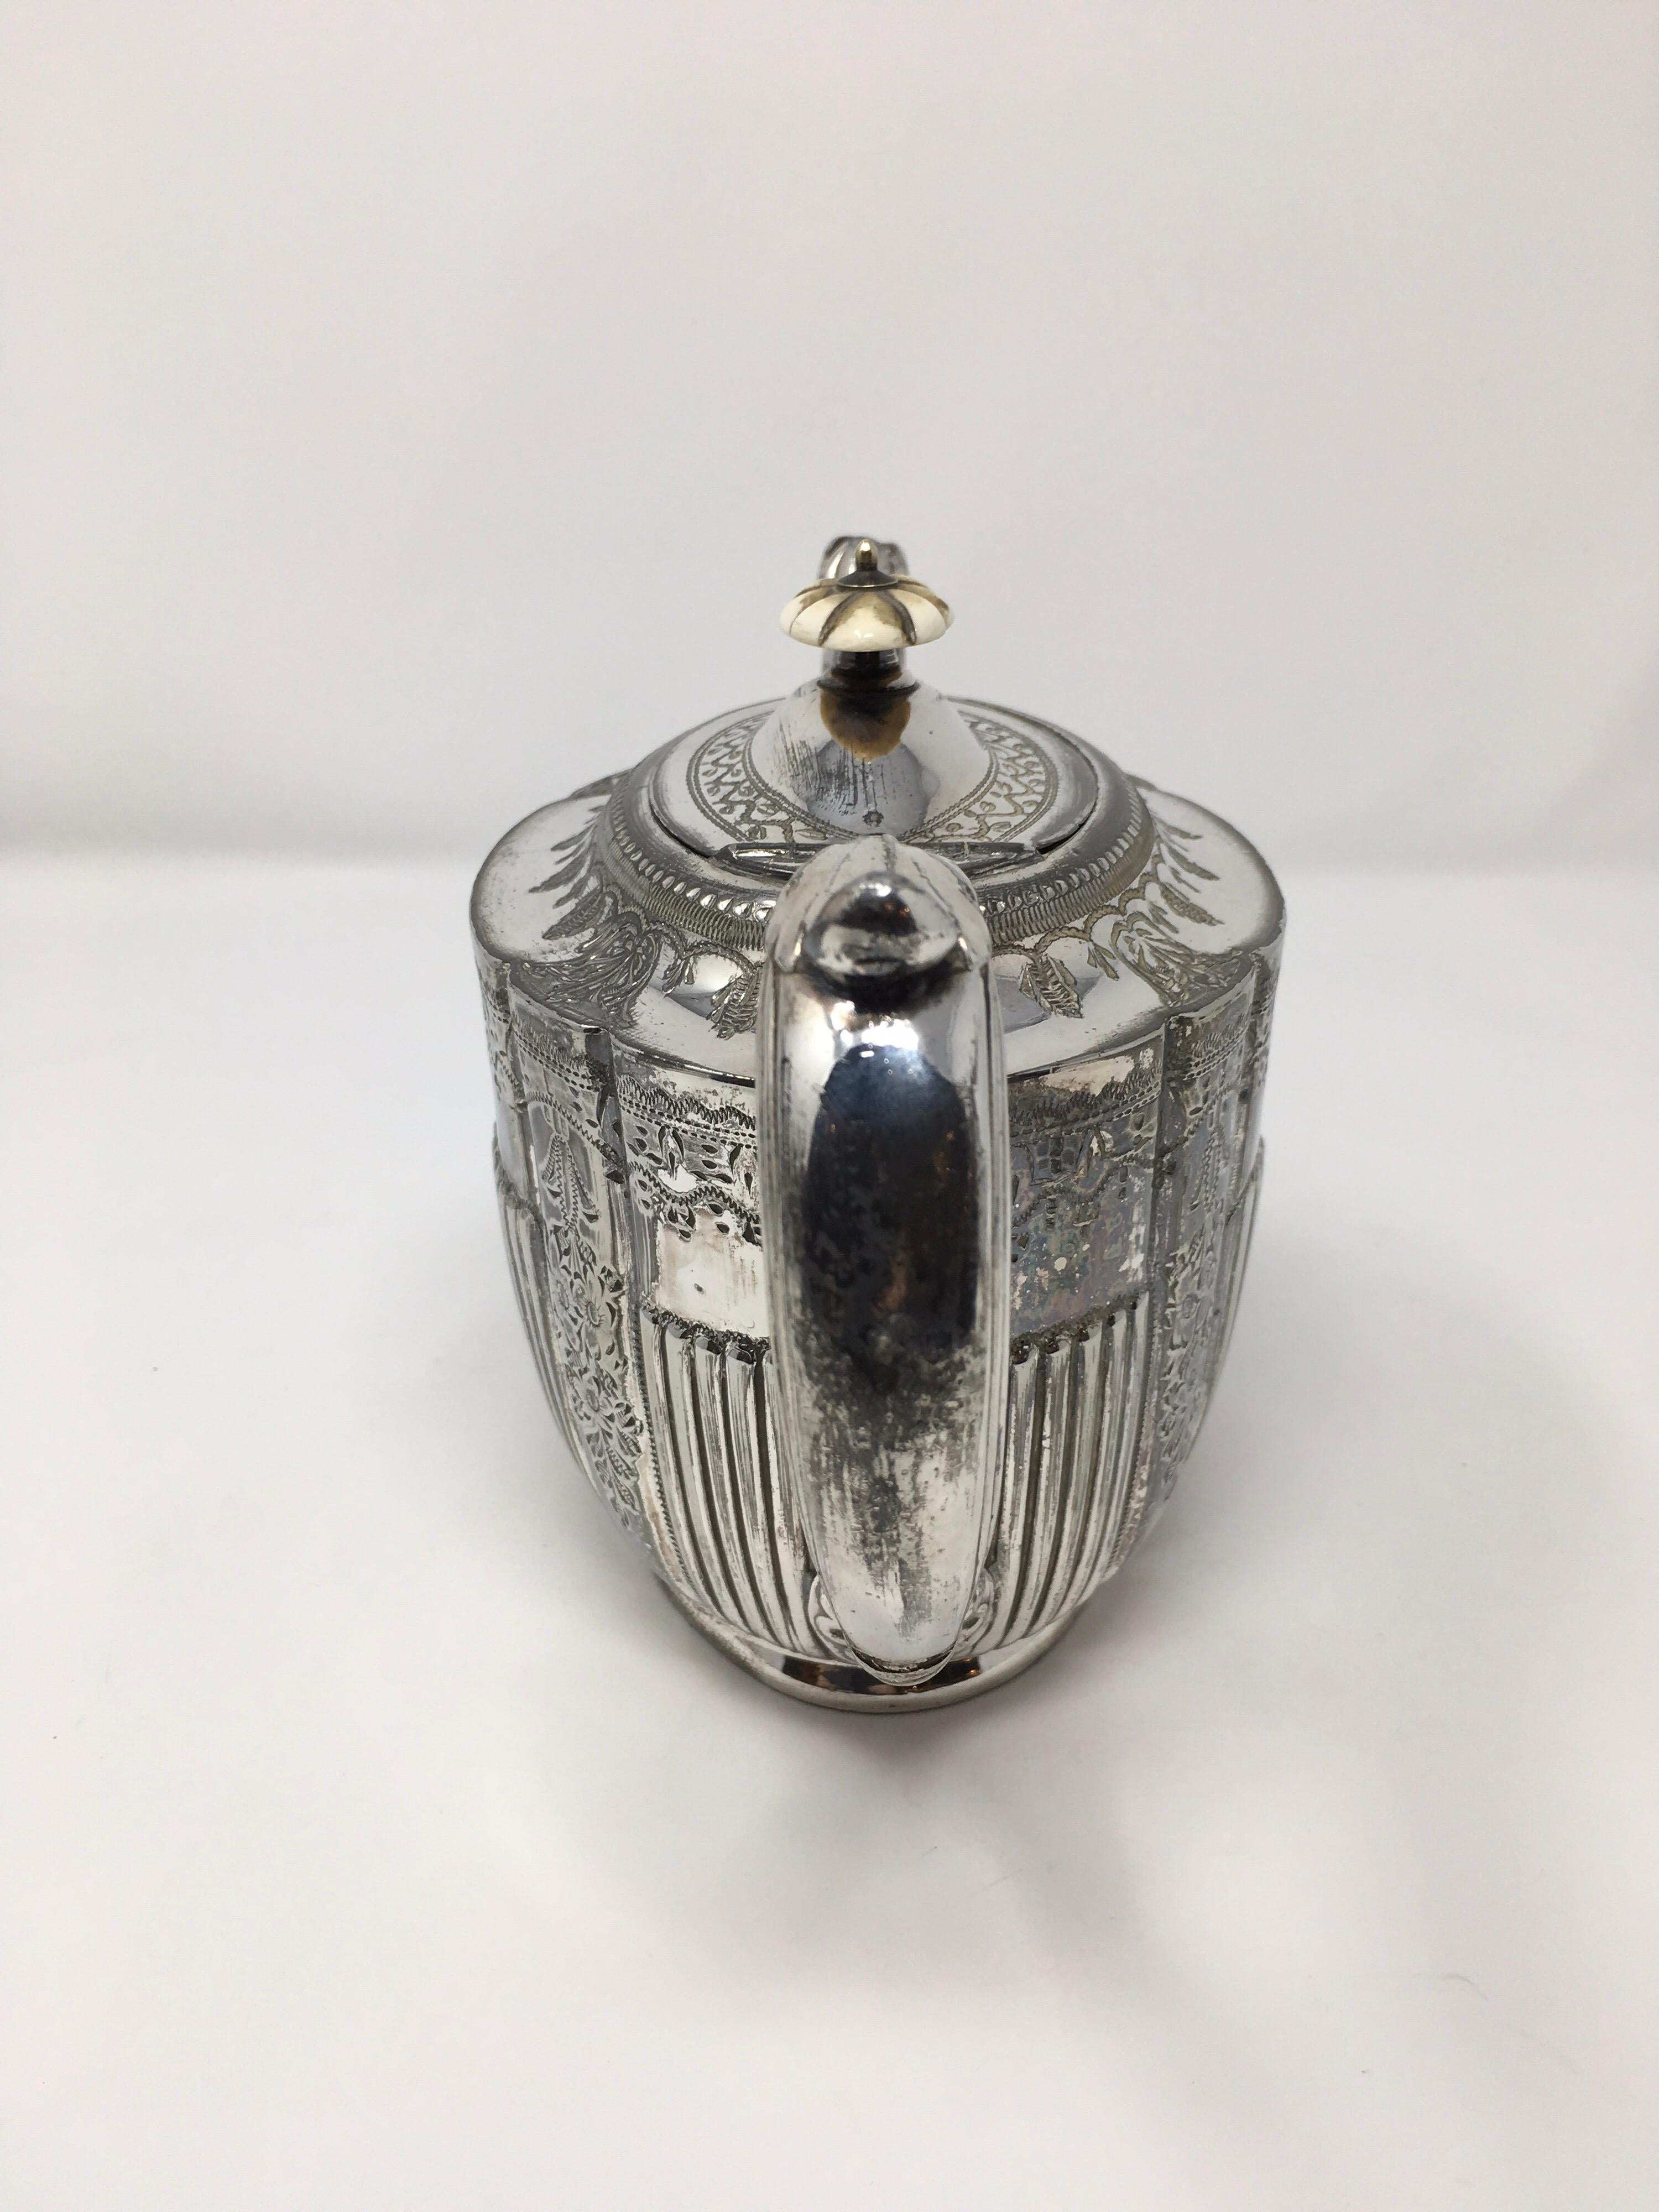 This is a lovely English silver plate teapot made by Atkin Brothers. The teapot has an attached lid and a lovely curved handle. The engraving on each side depicts floral and geometric shapes. The hall marks on the bottom of the piece lead us to